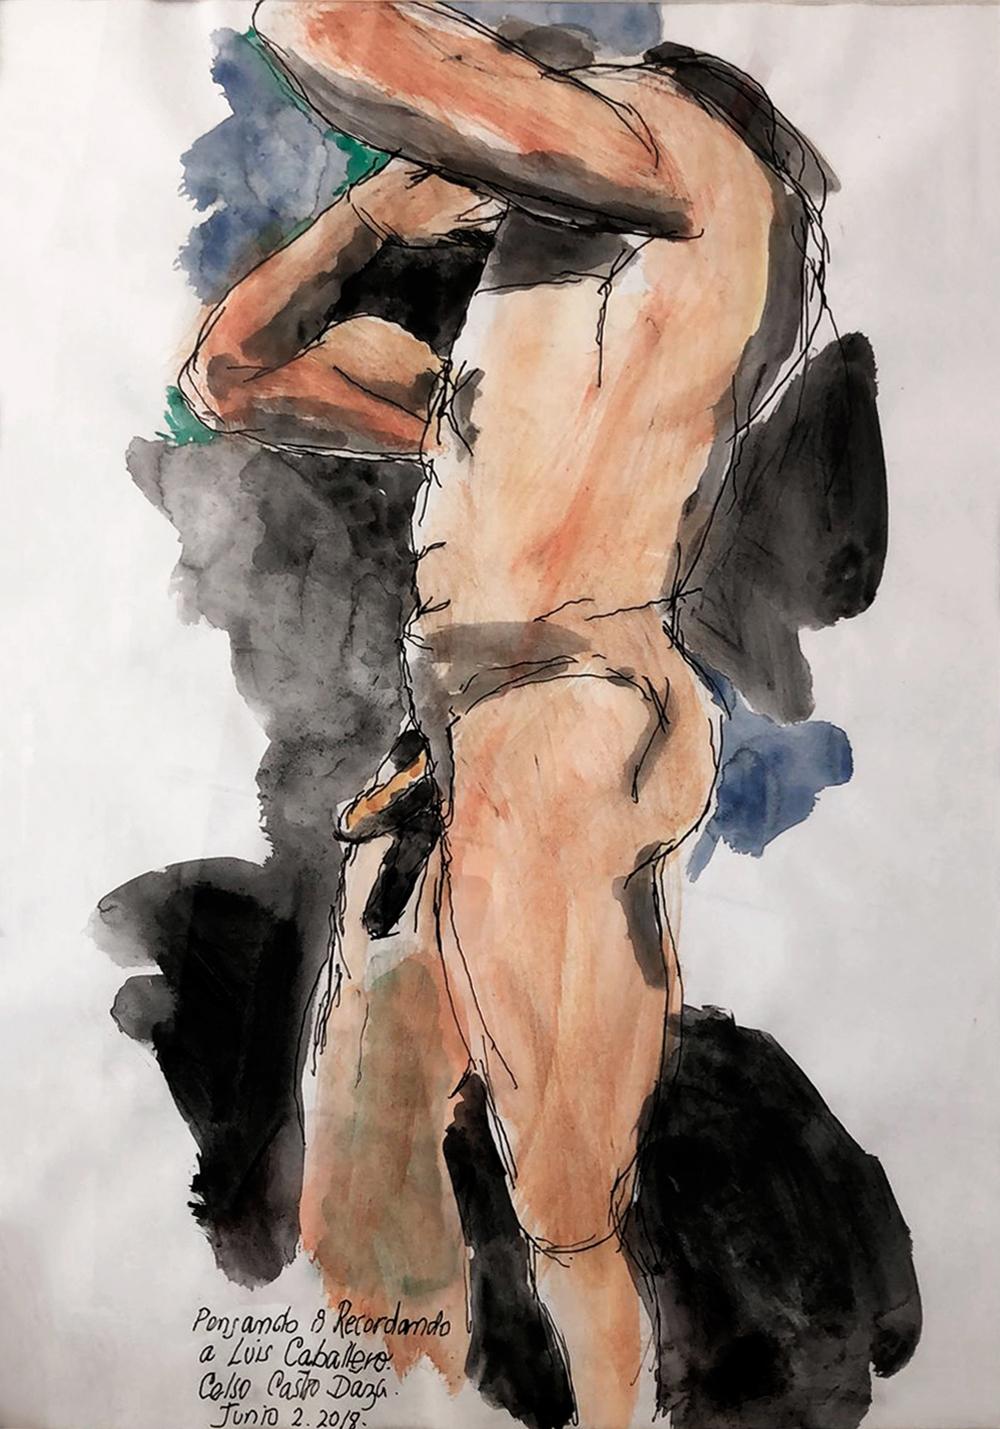 From the Duchándome, Nudes Series. Set of 4 Watercolors on archival paper  - Art by Celso José Castro Daza